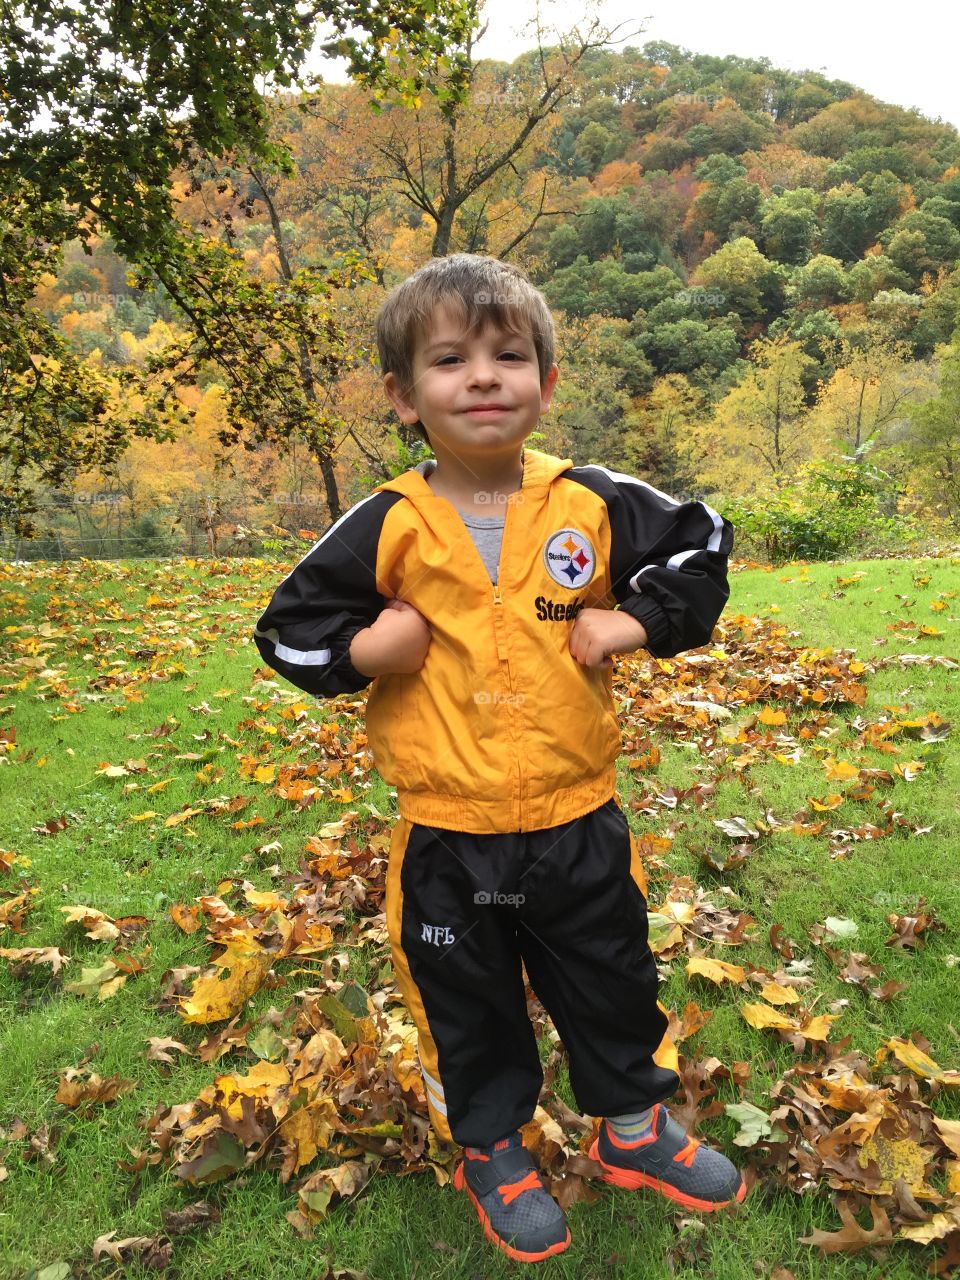 Fall scenery . Adorable toddler ready for game day